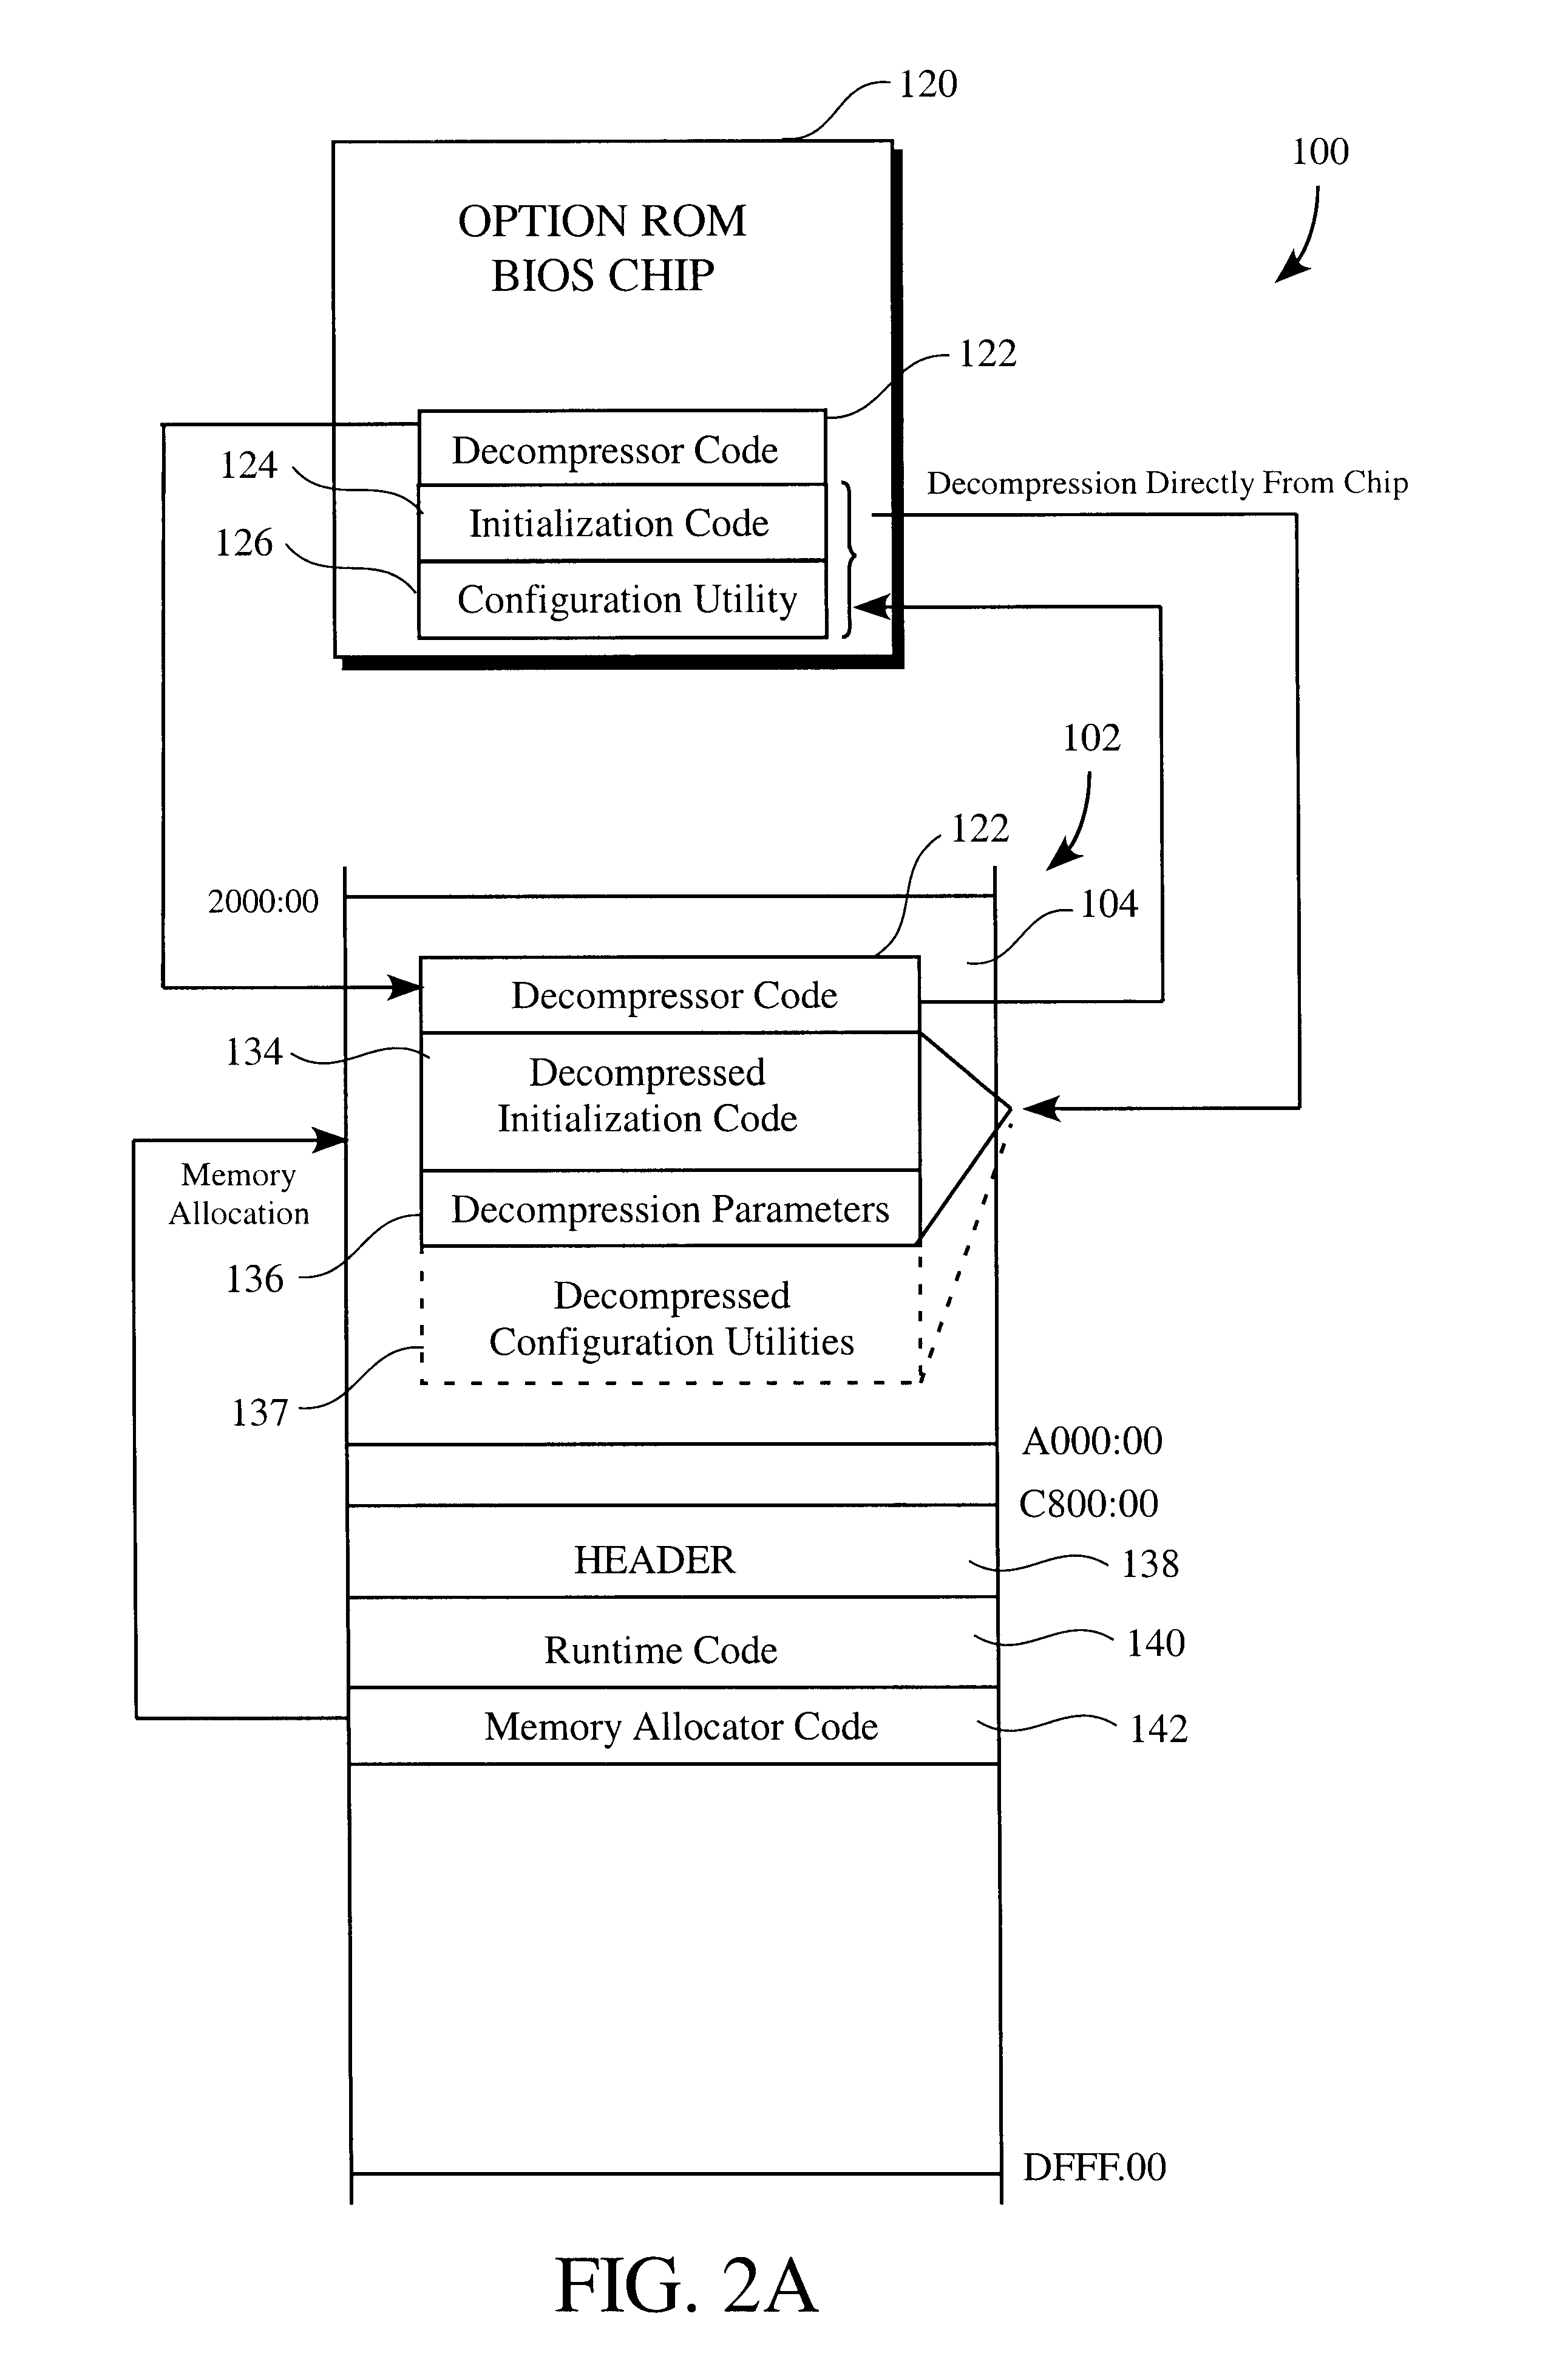 Method of conserving memory resources during execution of system BIOS